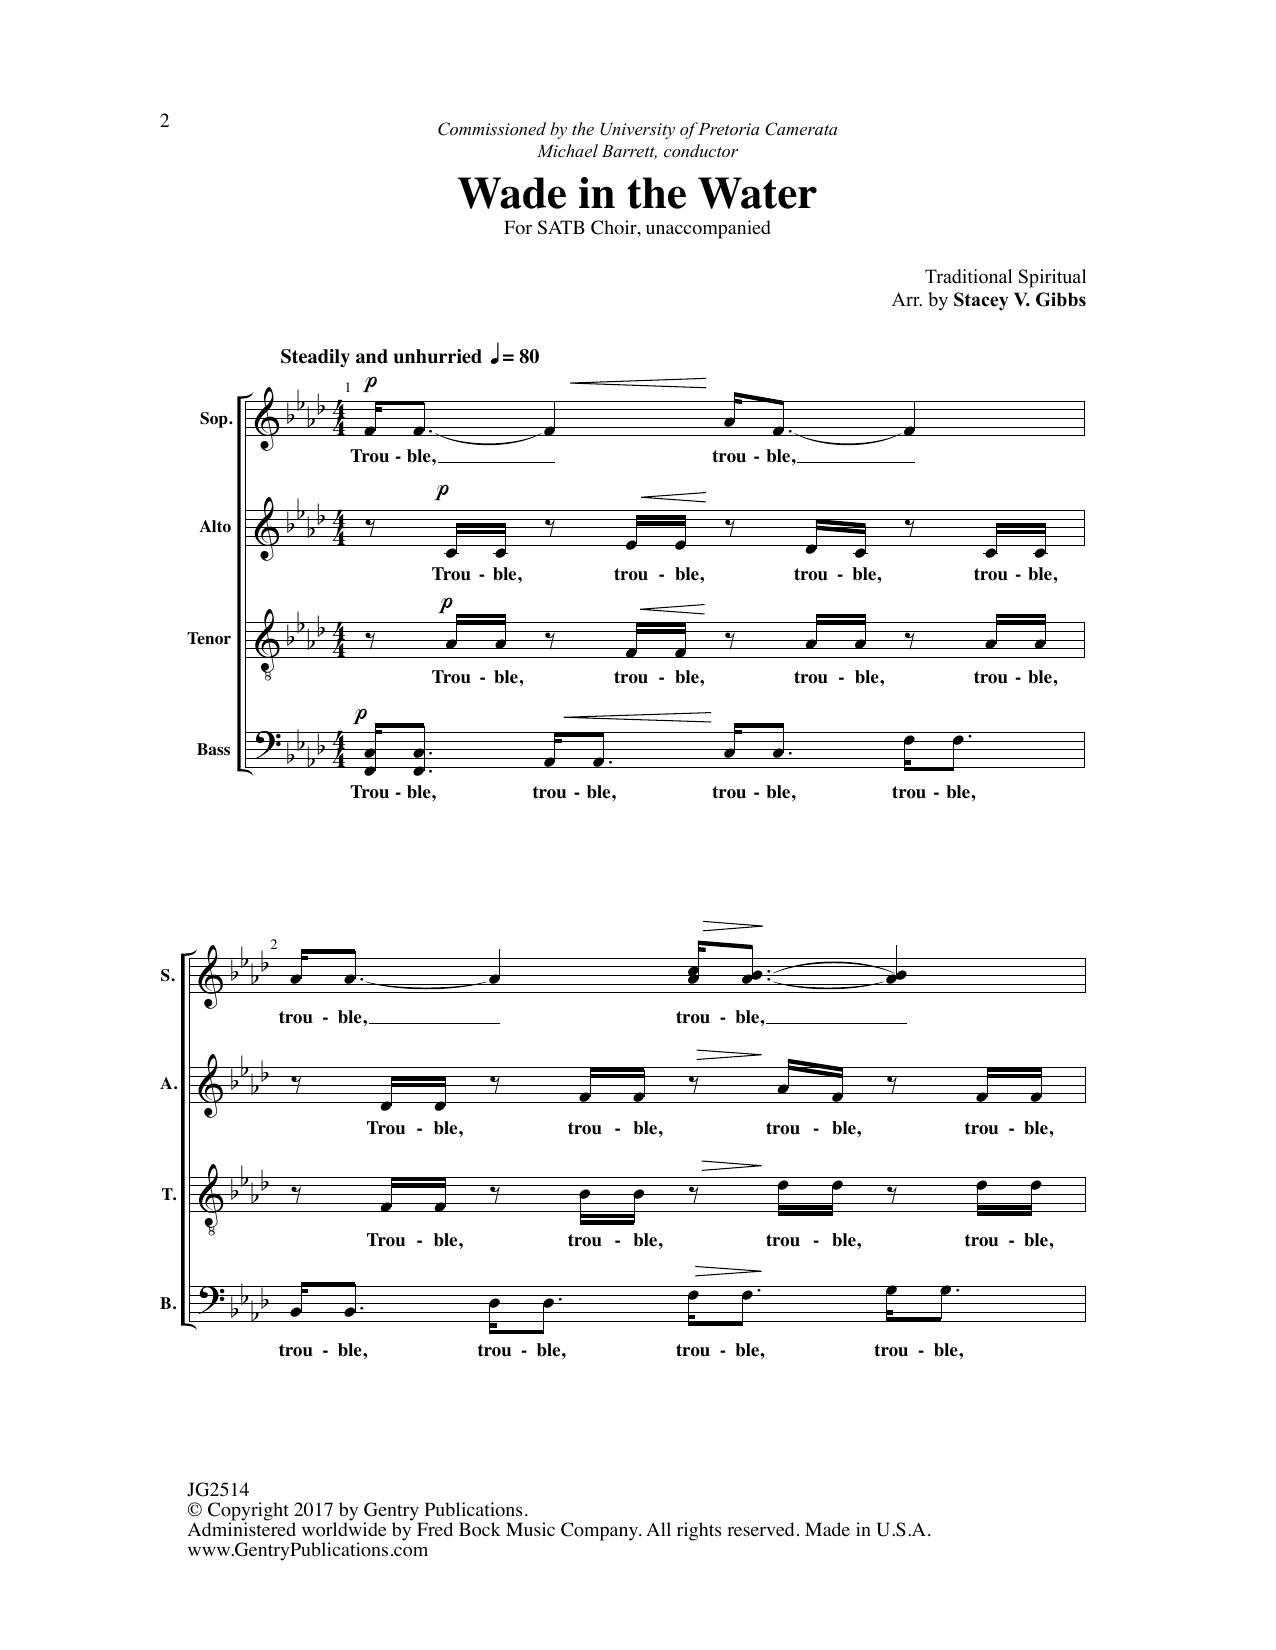 Download Stacey V. Gibbs Wade in the Water Sheet Music